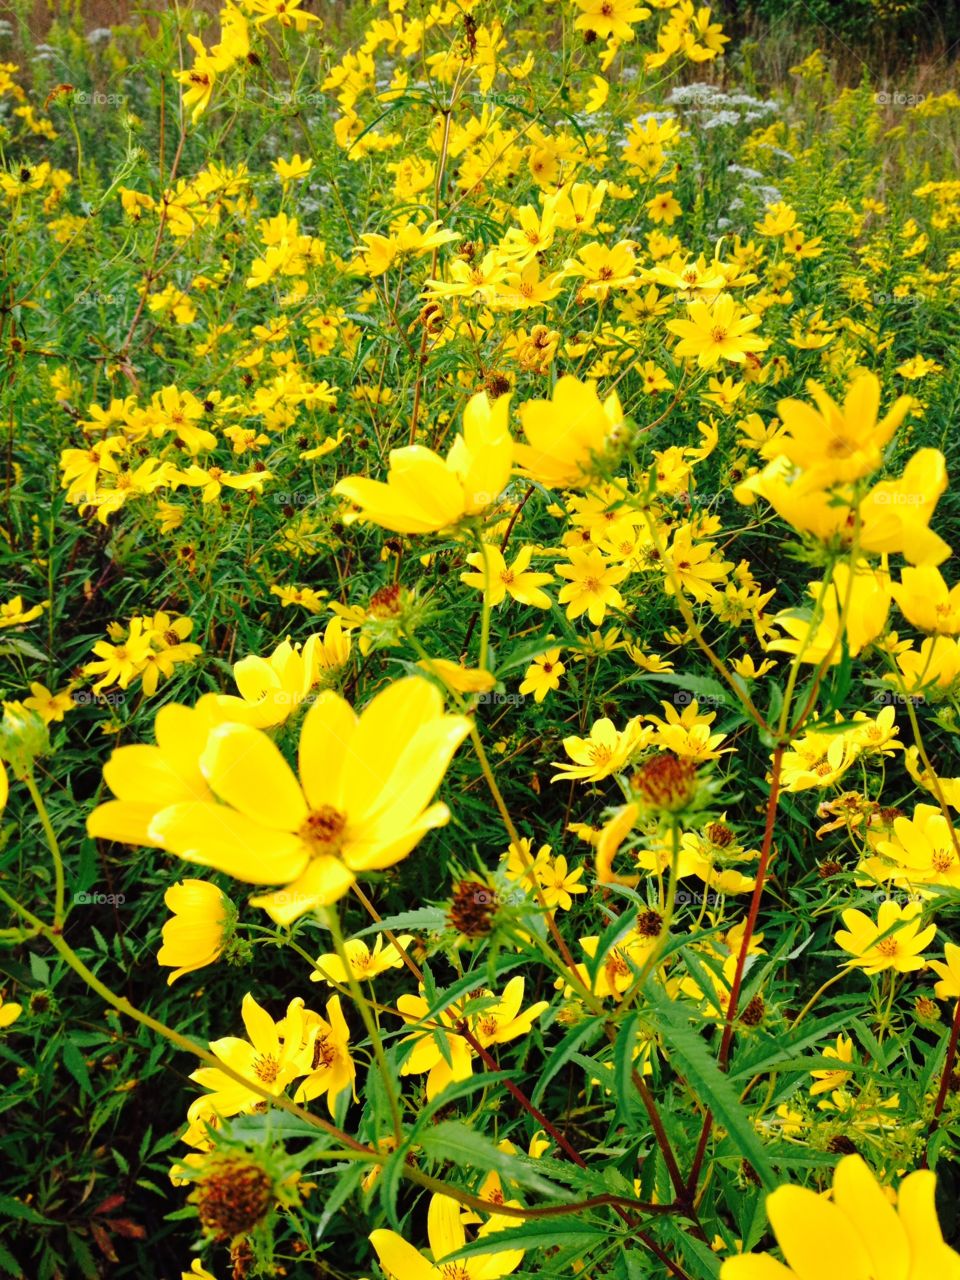 Meadow full of yellow flowers. 